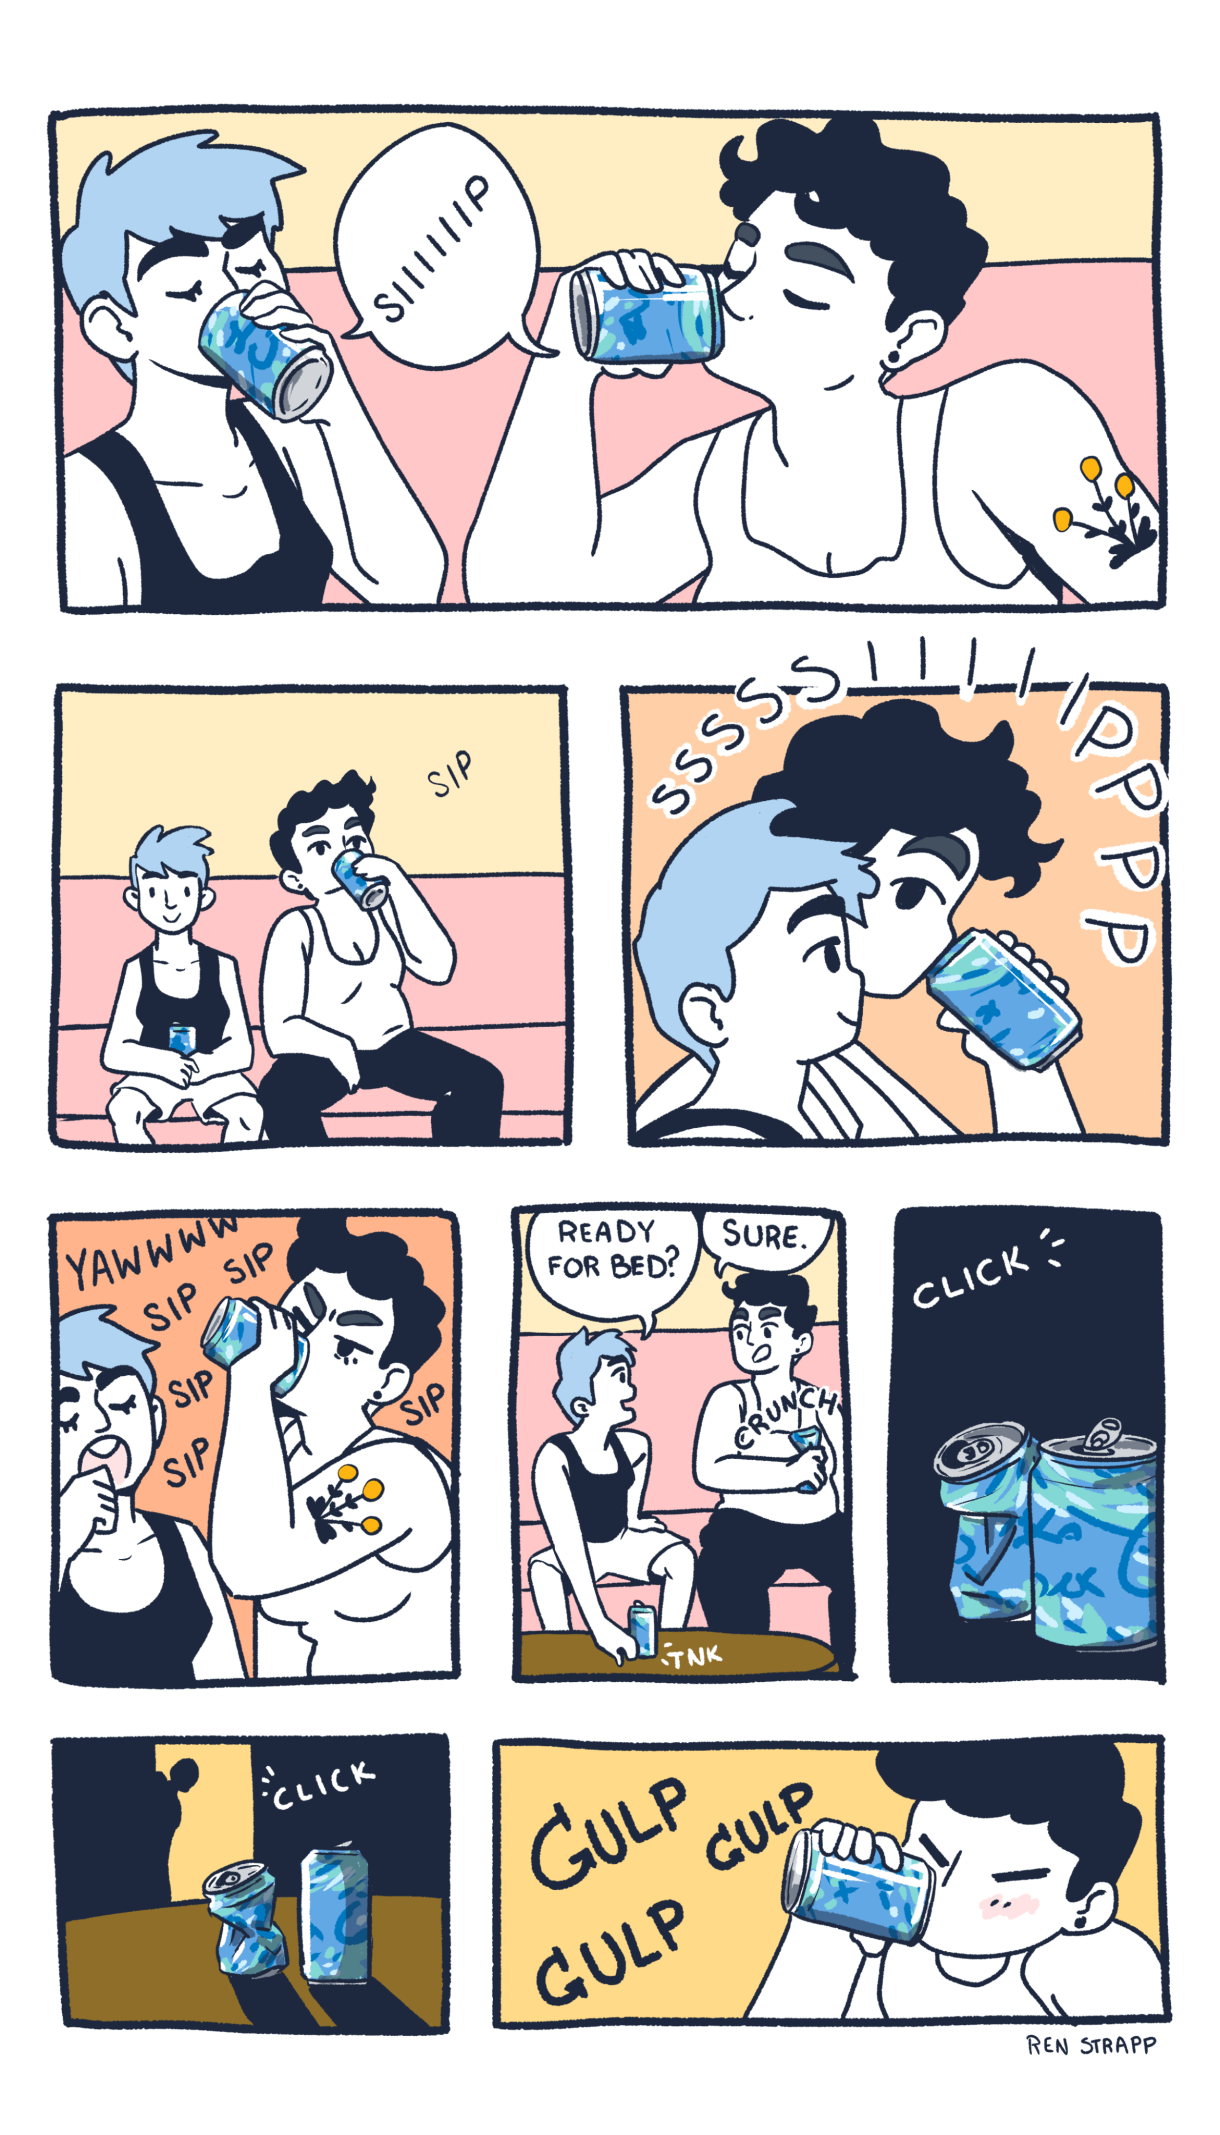 An eight panel comic of two queers drinking an ice cold can of seltzer water. They both have short hair cuts and are wearing tank tops — one of them has their hair dyed blue. They drink all day long, and then after they get ready for bed one of them gets stuck drinking the warm leftover seltzer at the end of the day.